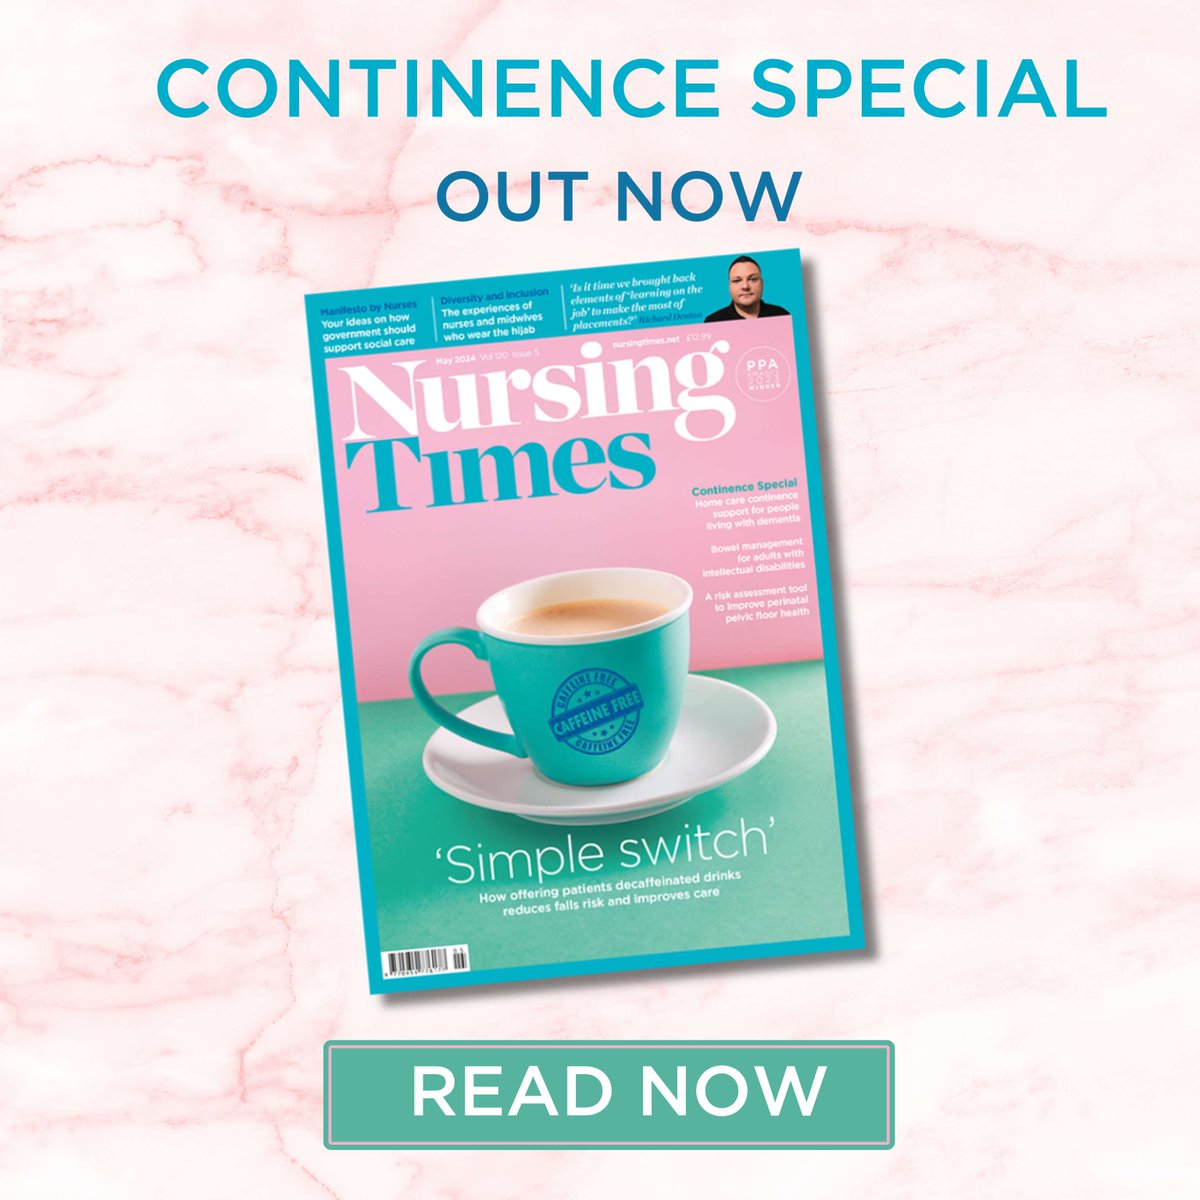 @nursingtimes May issue is all about what a continence specialist nurse has achieved through simply switching caffeinated drinks for decaffeinated alternatives, and its potential for improving patient experience and reducing falls risk. And more> Read now ow.ly/BxMy50RssEm